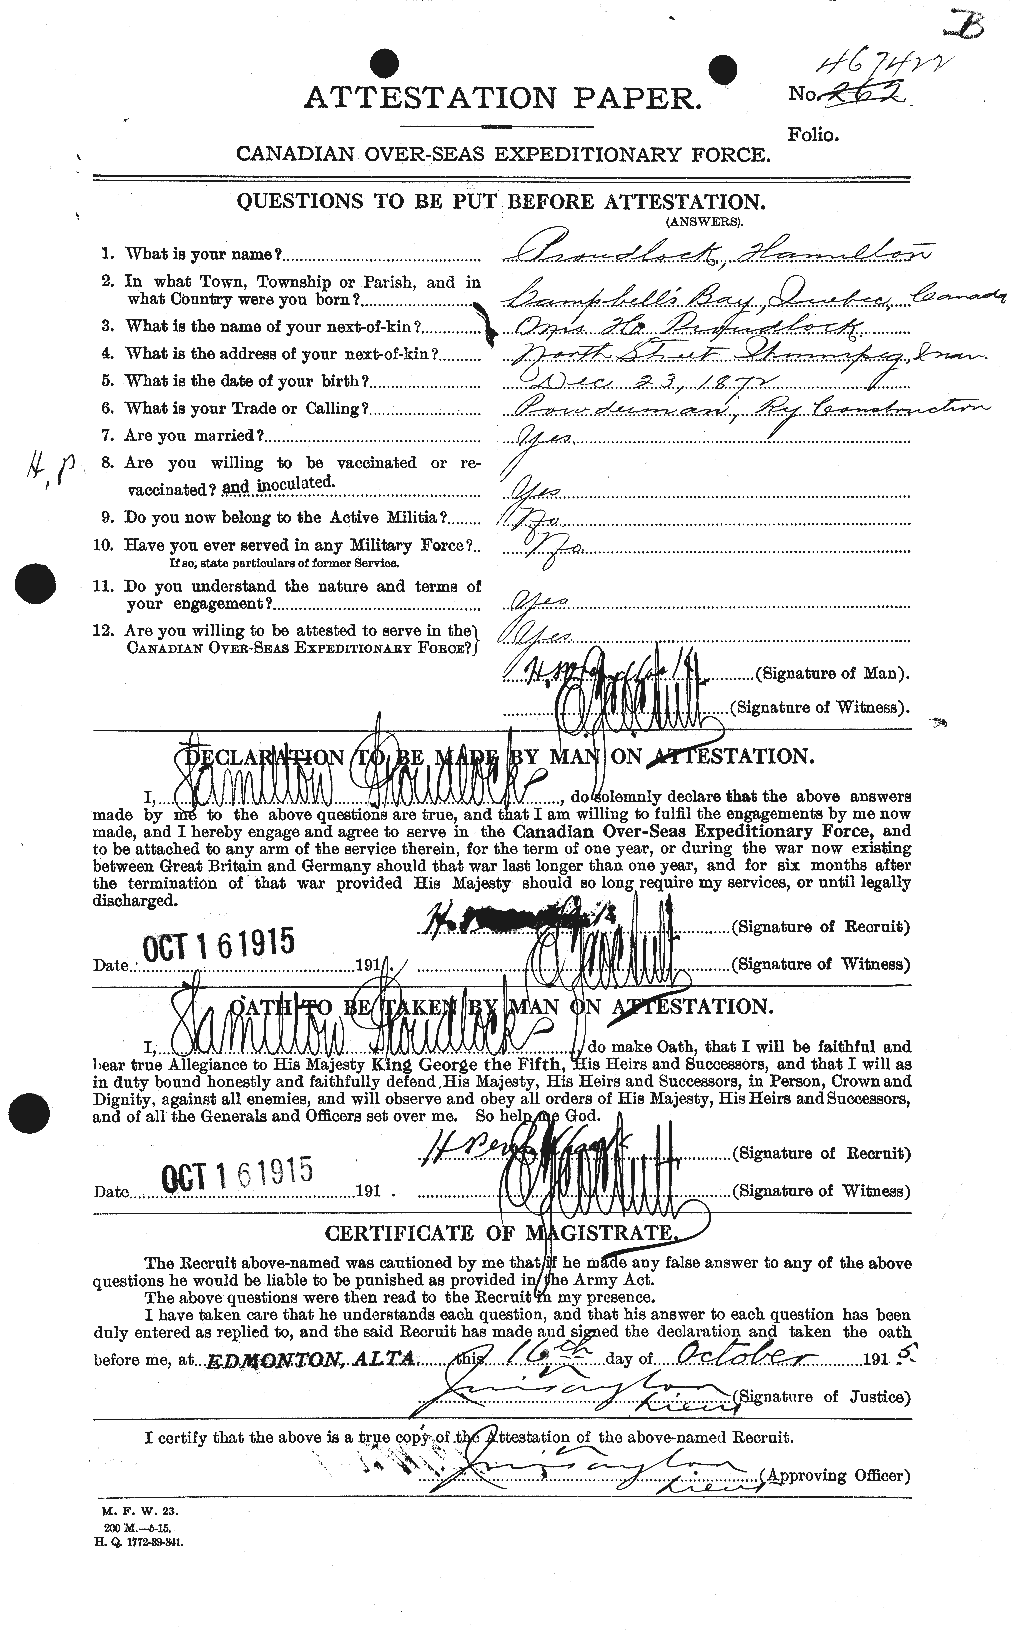 Personnel Records of the First World War - CEF 591483a